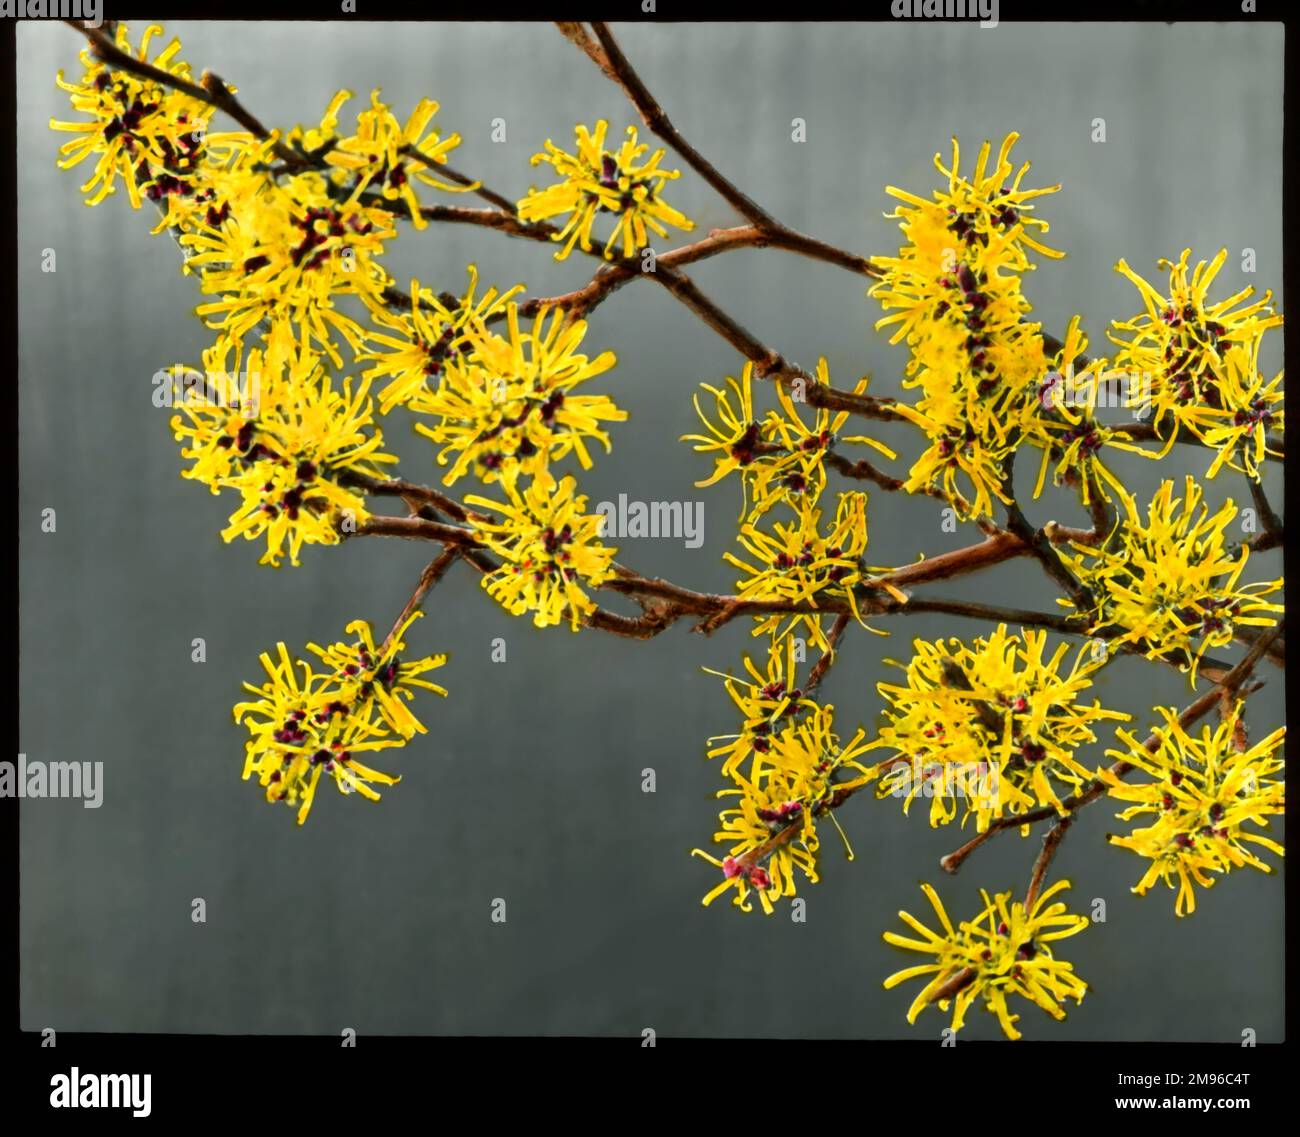 Hamemalis (or Hamamelis) Mollis (Witch Hazel), a large shrub or small tree of the Hamamelidaceae family, native to areas of China.  It flowers from late winter to early spring, and the yellow flowers have a strong scent. Stock Photo